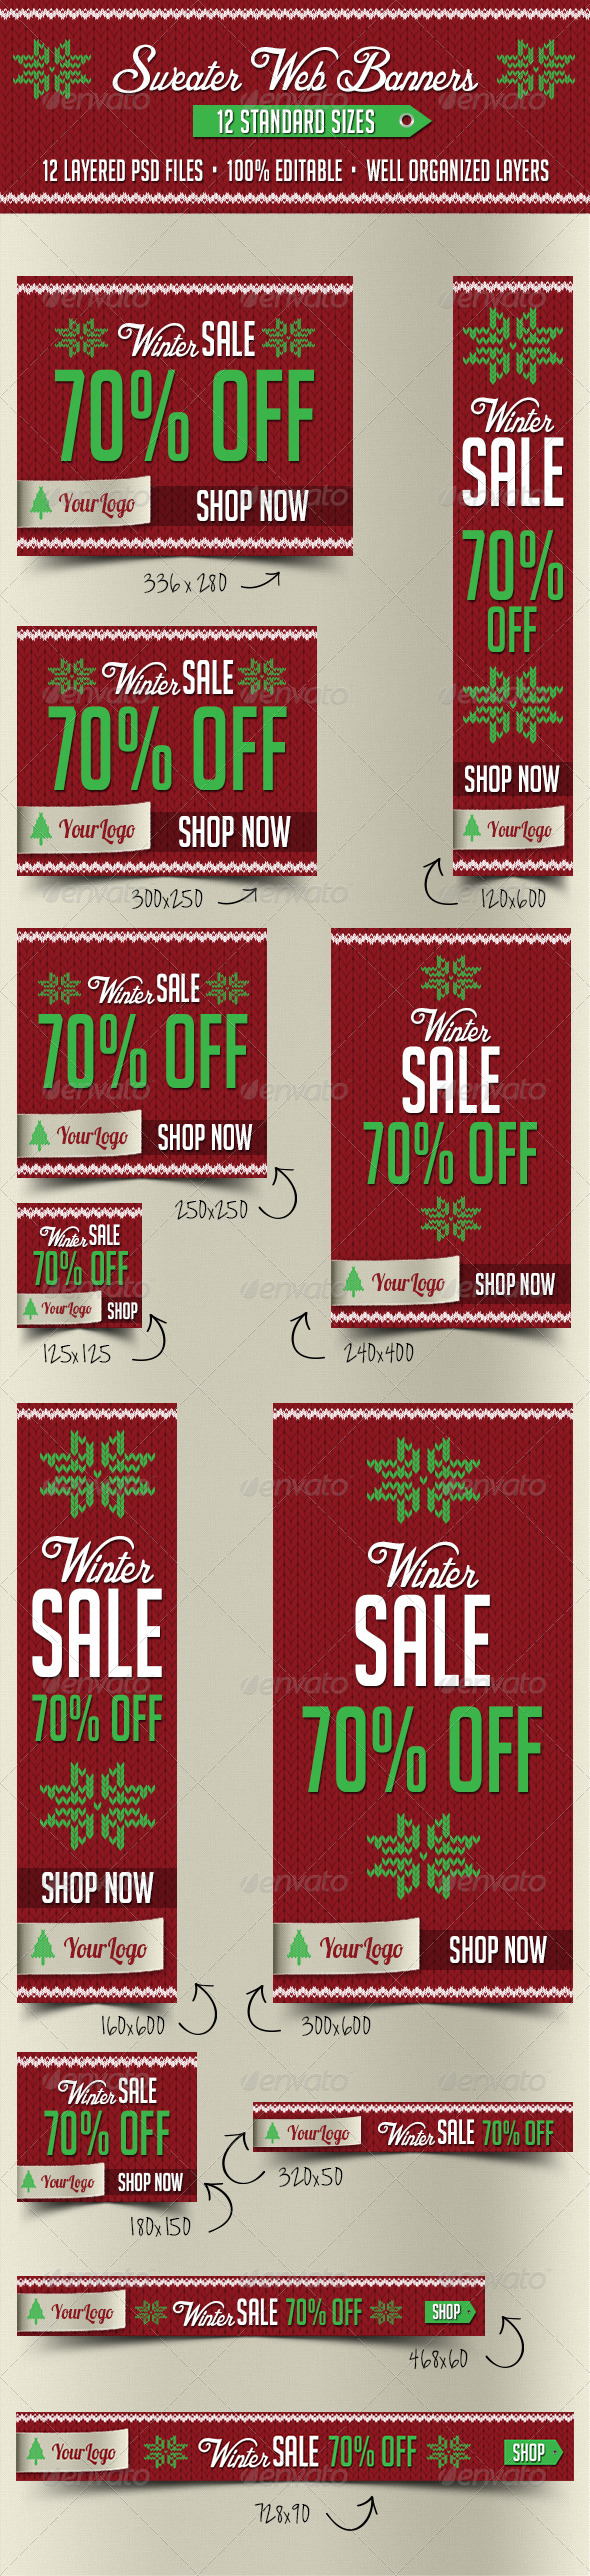 Sweater Web Banners (Banners & Ads)